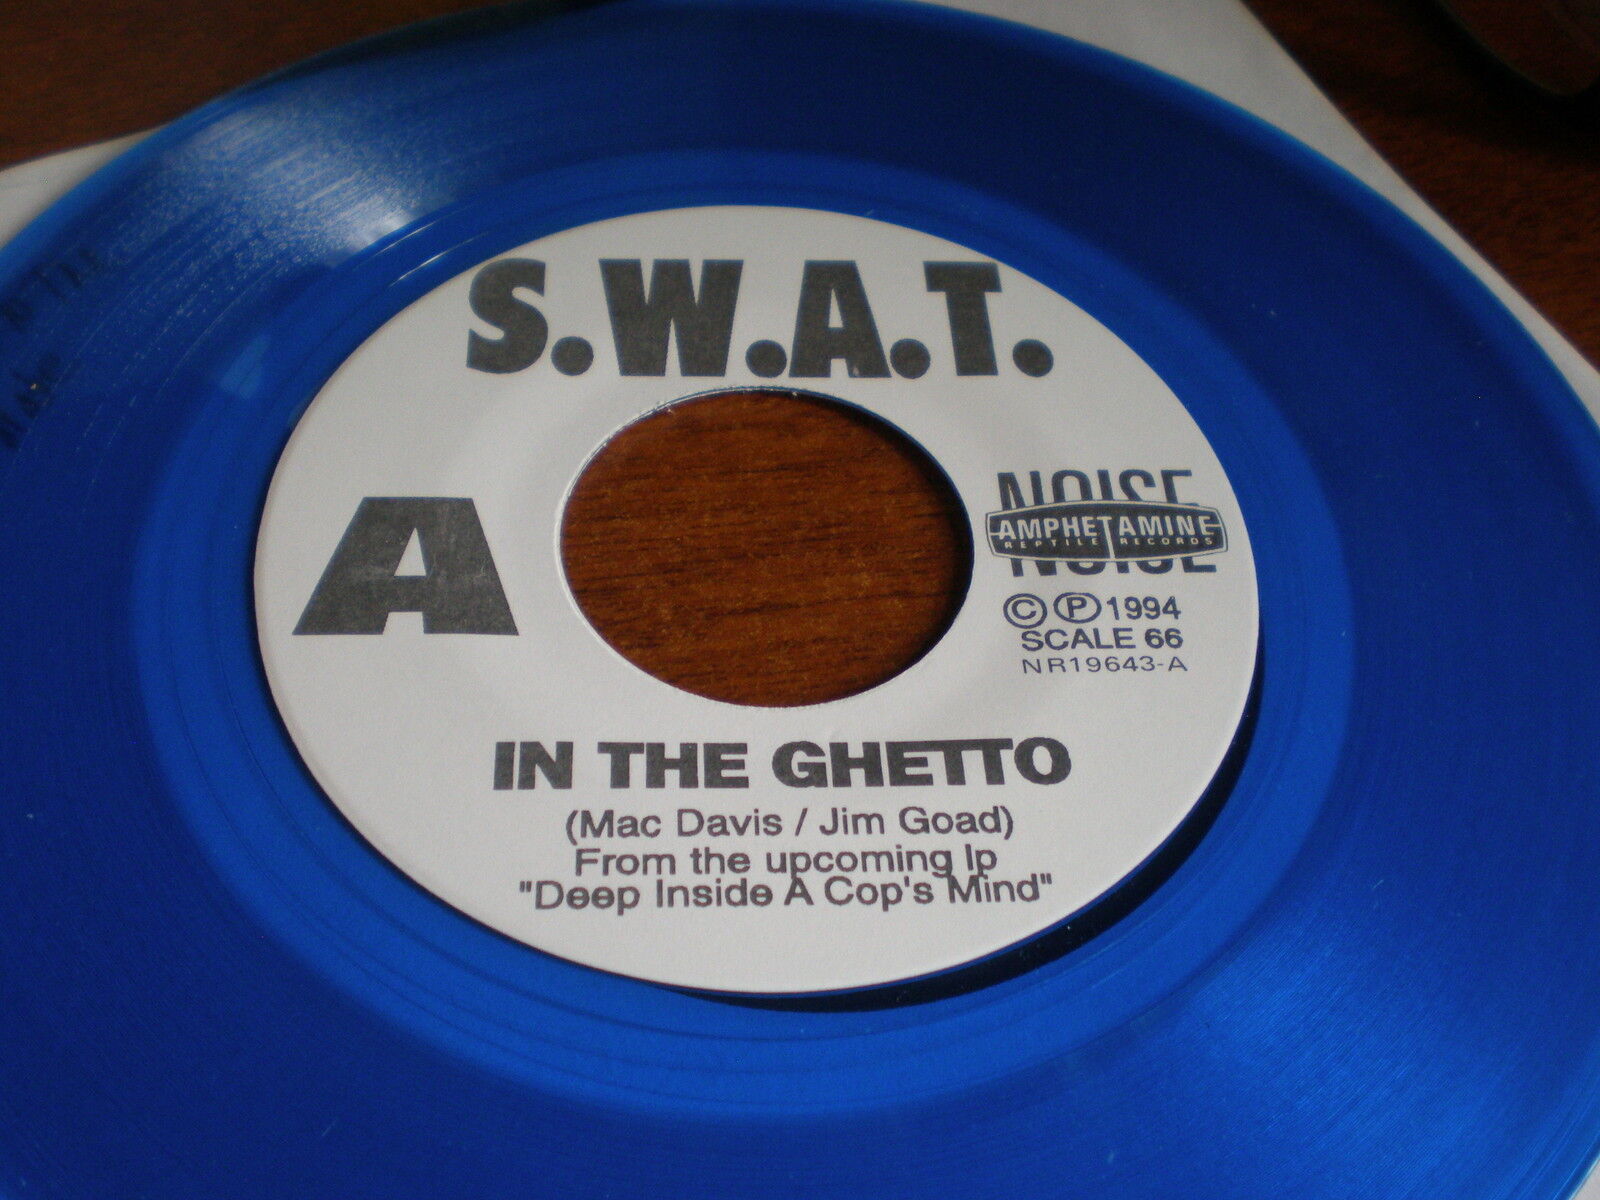 S W A T 7" The Soundtrack Of The New Police State AMPHETAMINE REPTIle BLUE VINYL